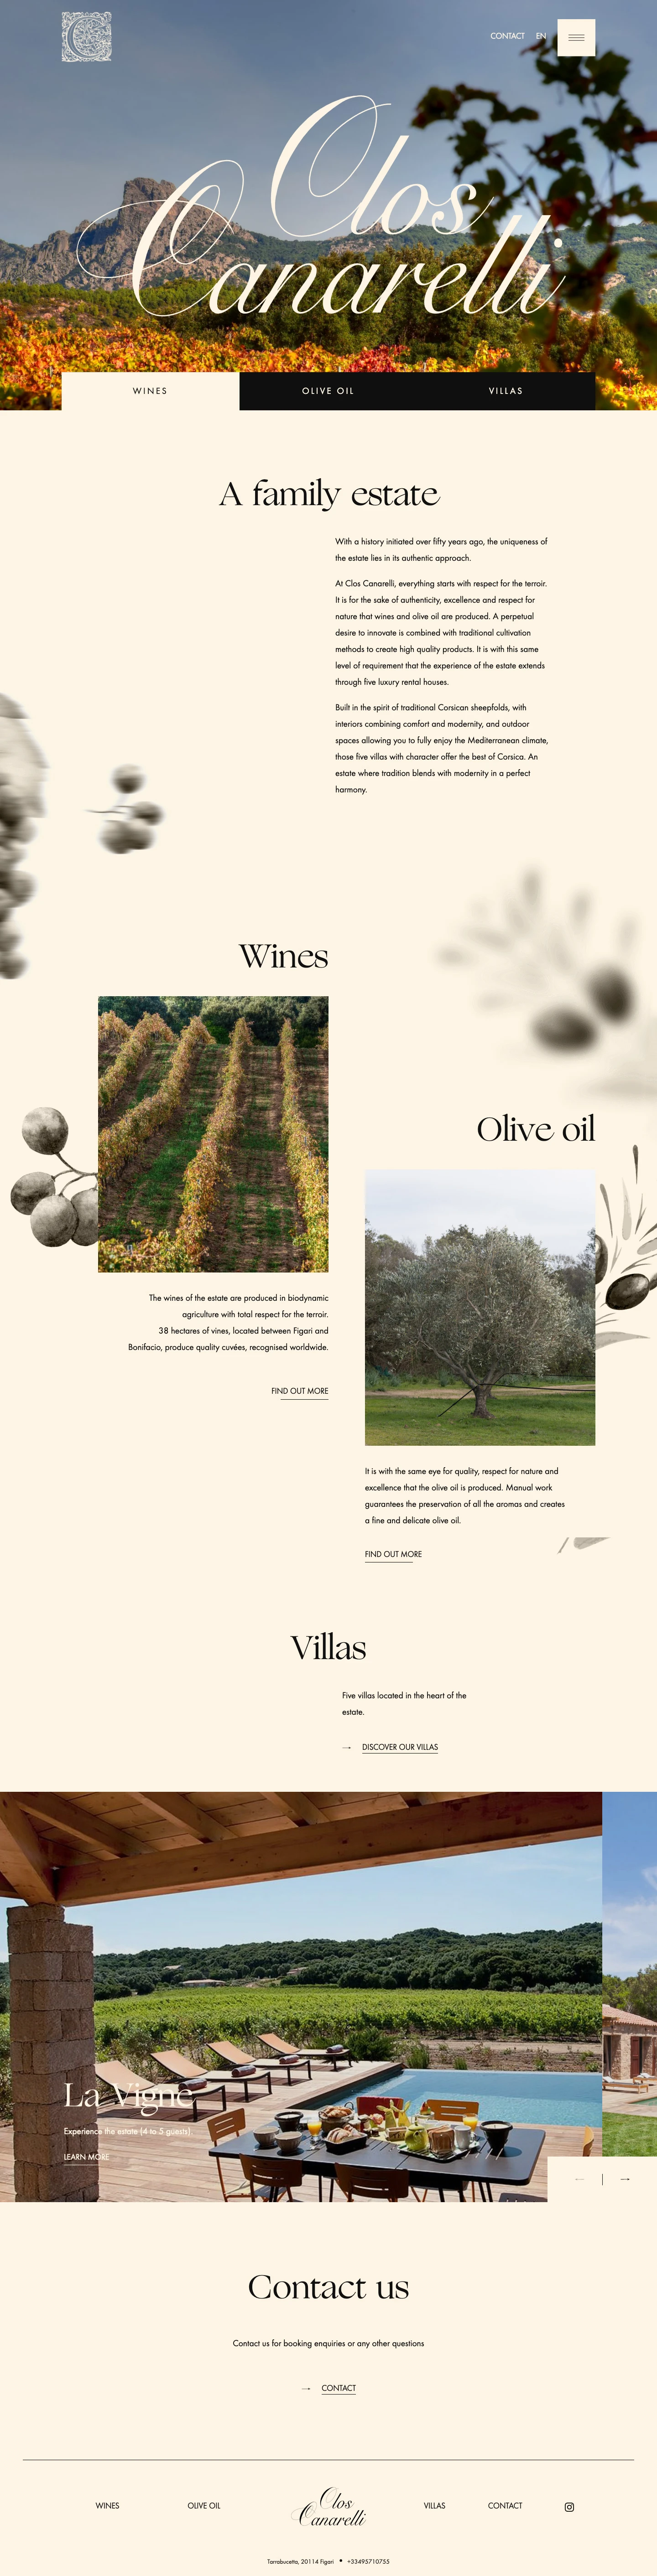 Clos Canarelli Landing Page Example: A unique estate in Southern Corsica. Discover the wines, olive oil and luxury villas to rent.